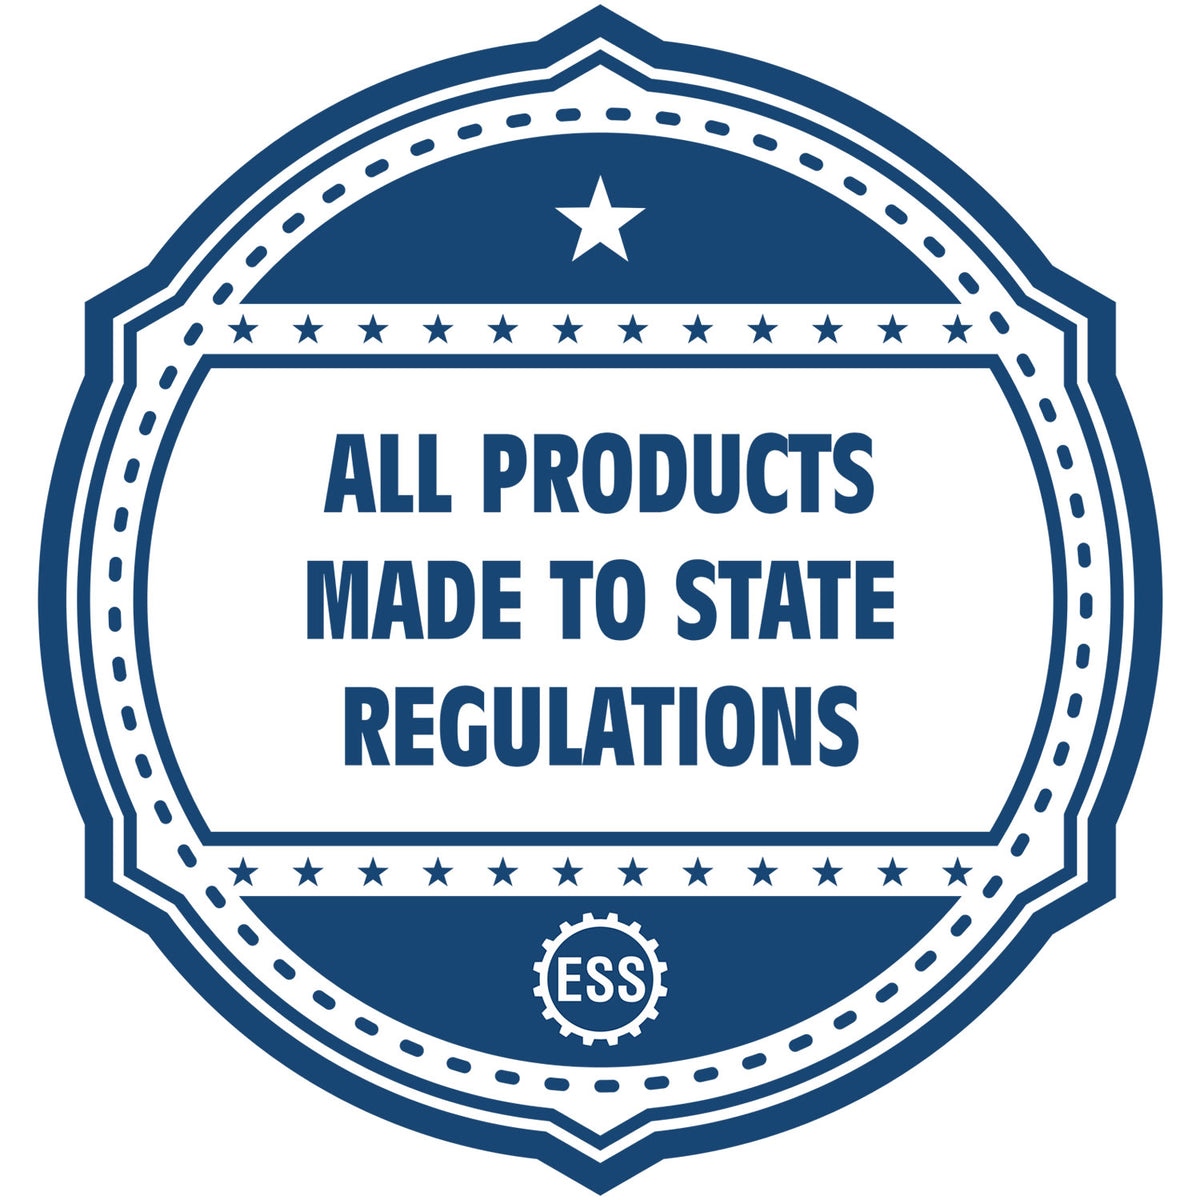 An icon or badge element for the Montana Professional Engineer Seal Stamp showing that this product is made in compliance with state regulations.